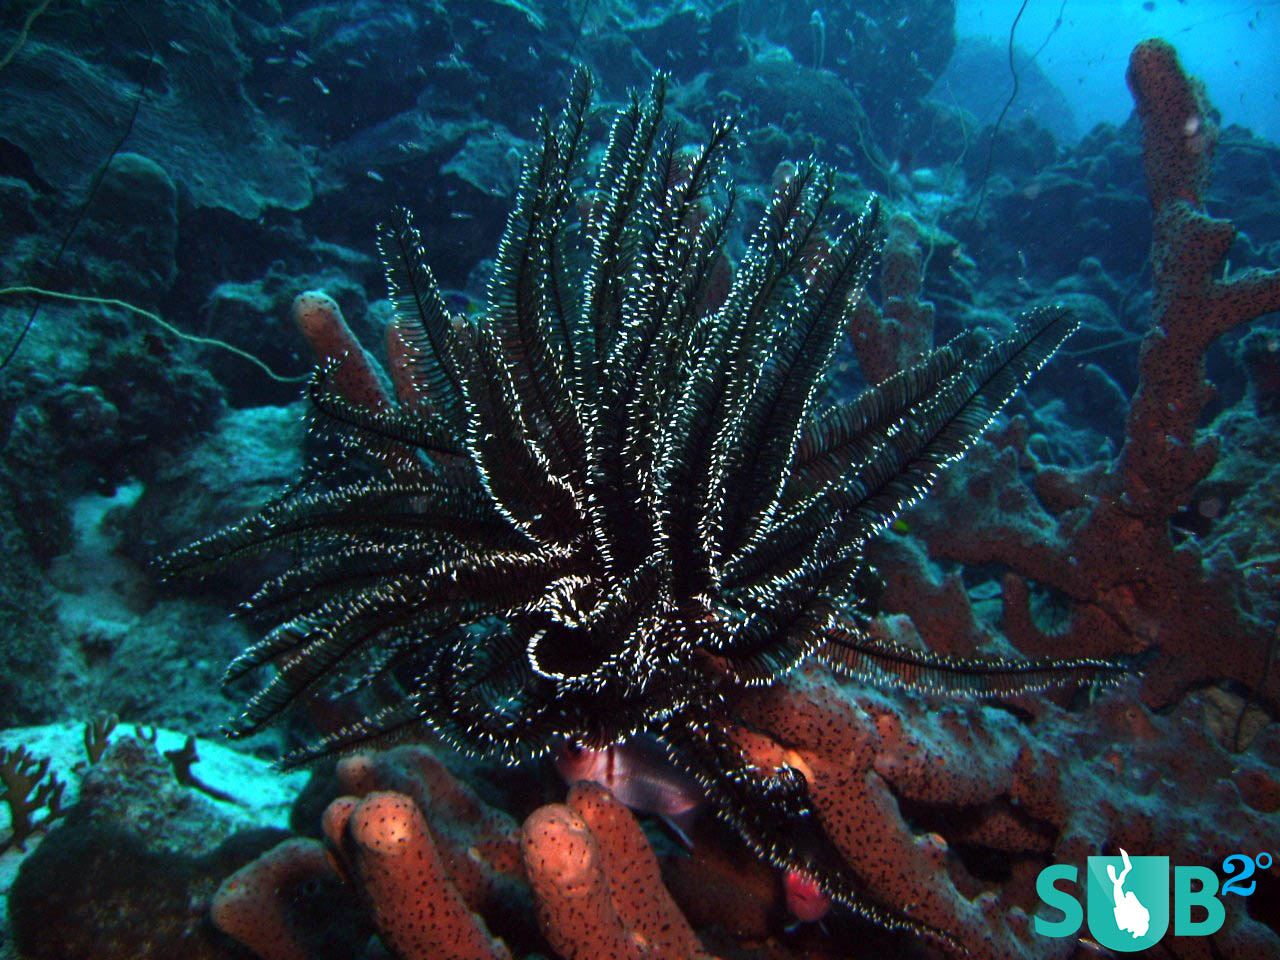 This Island has rare black coral that is found nowhere else in this region, making it a unique diving spot. 